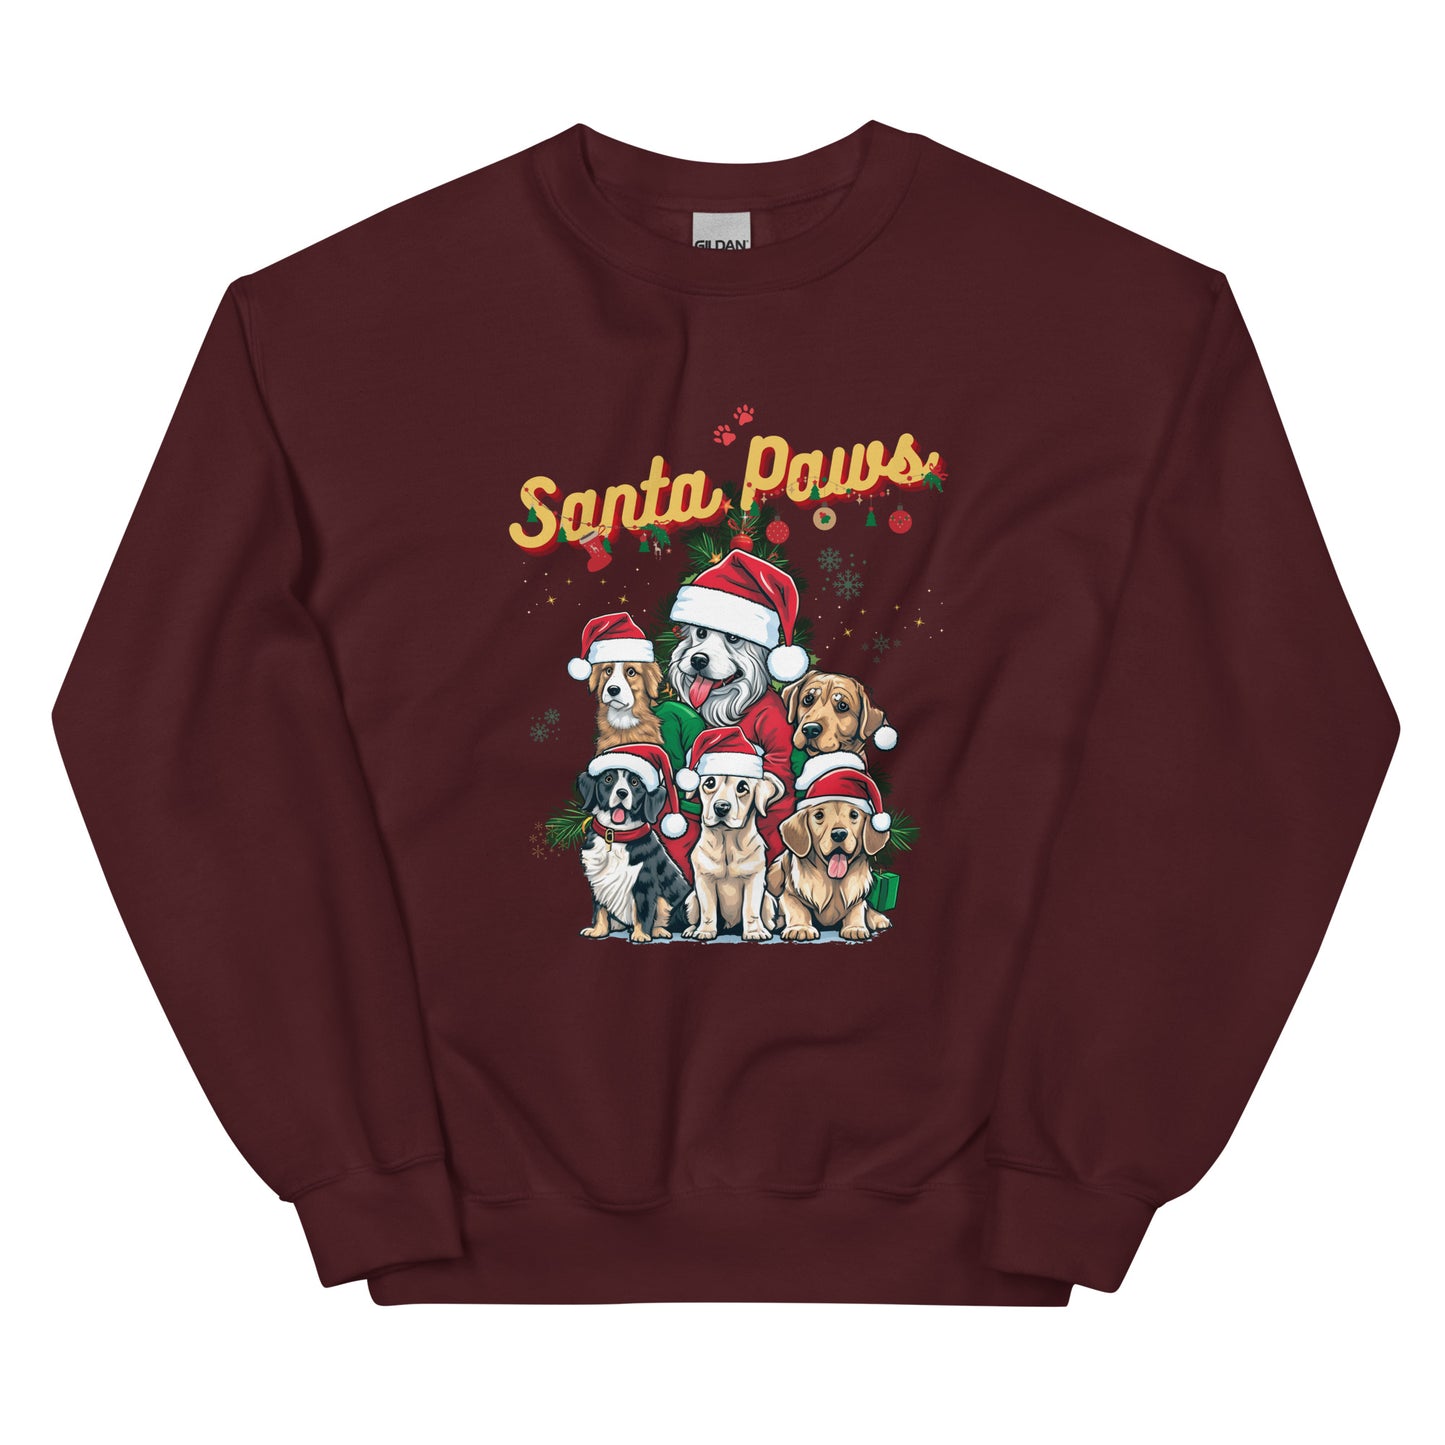 Santa Paws Unisex Sweatshirt - Cozy Winter Apparel for Pet Lovers | Festive Comfort, Warmth, and Style